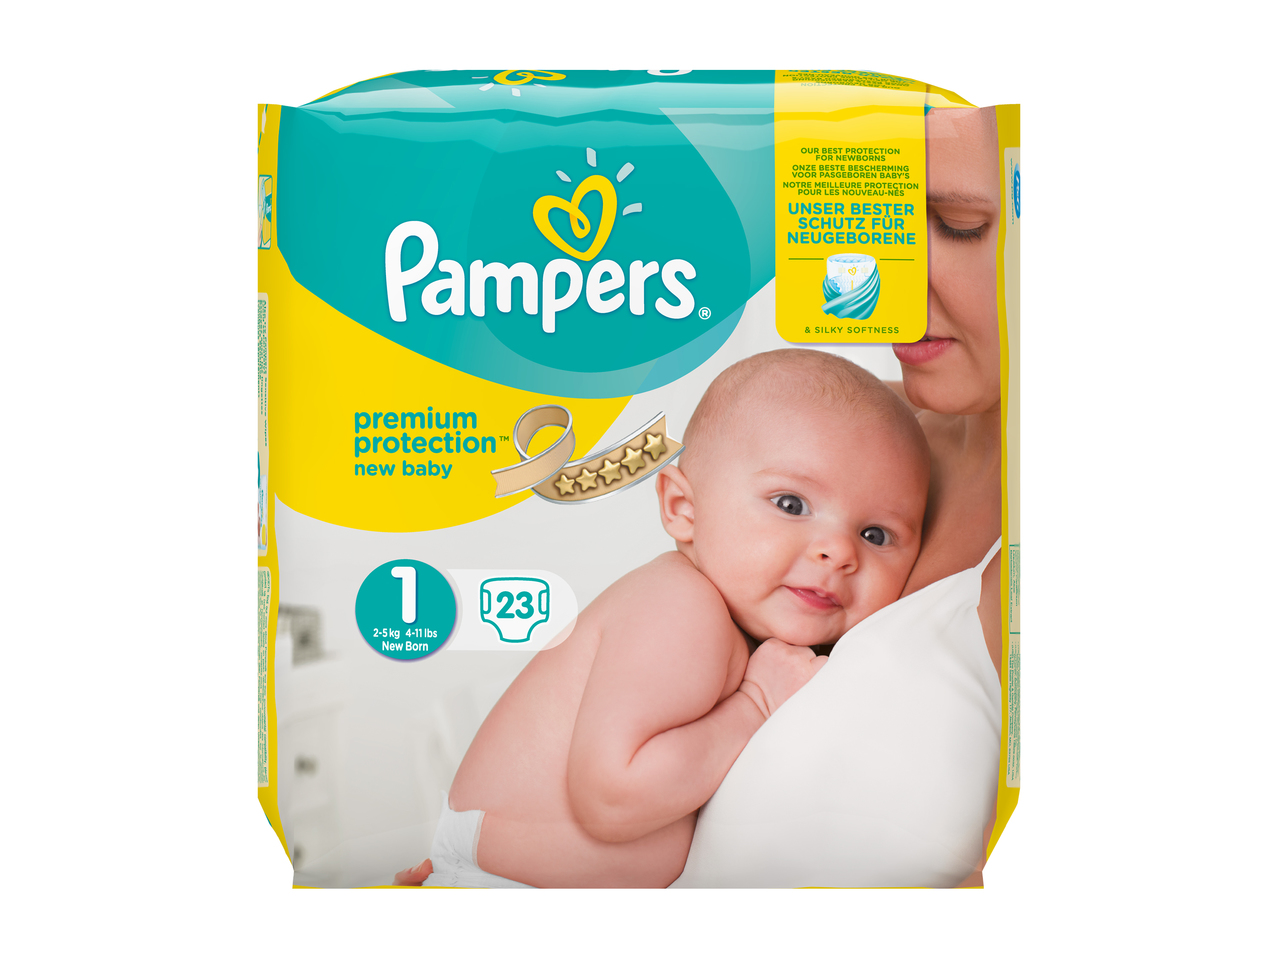 Pampers couches new baby